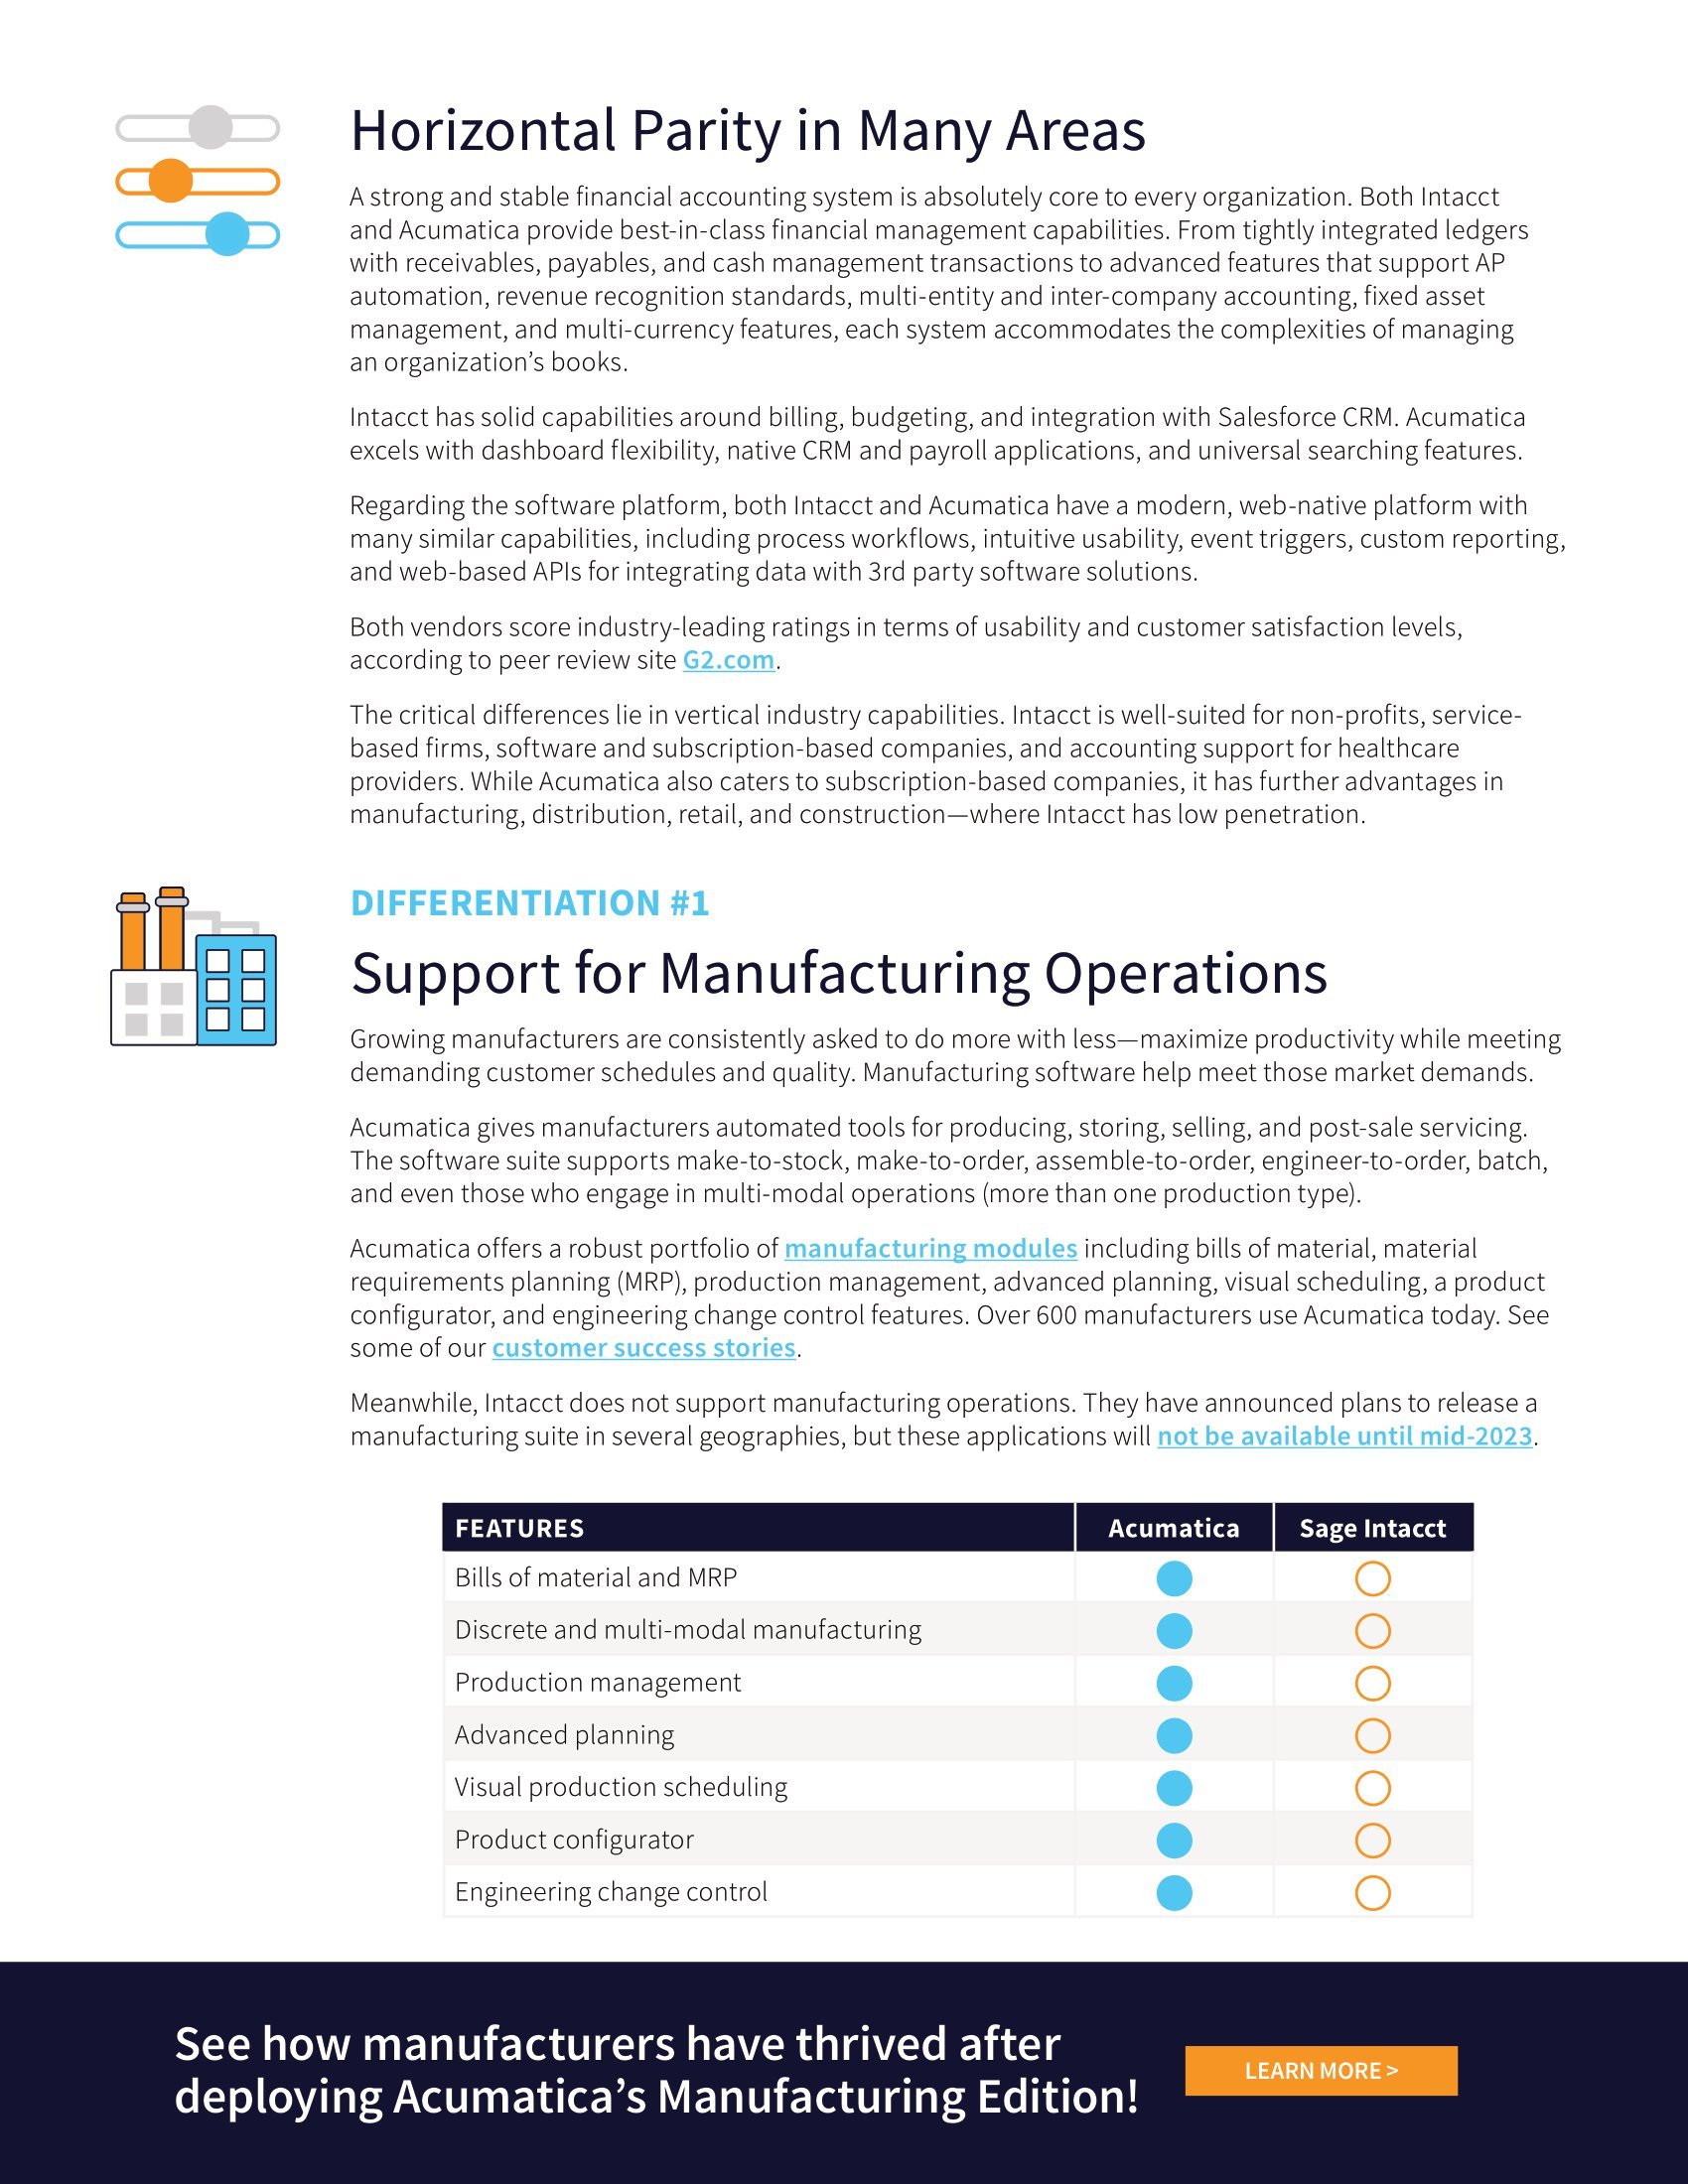 Evaluating Acumatica and Sage Intacct: Which One is Better for Growing Organizations? , page 1